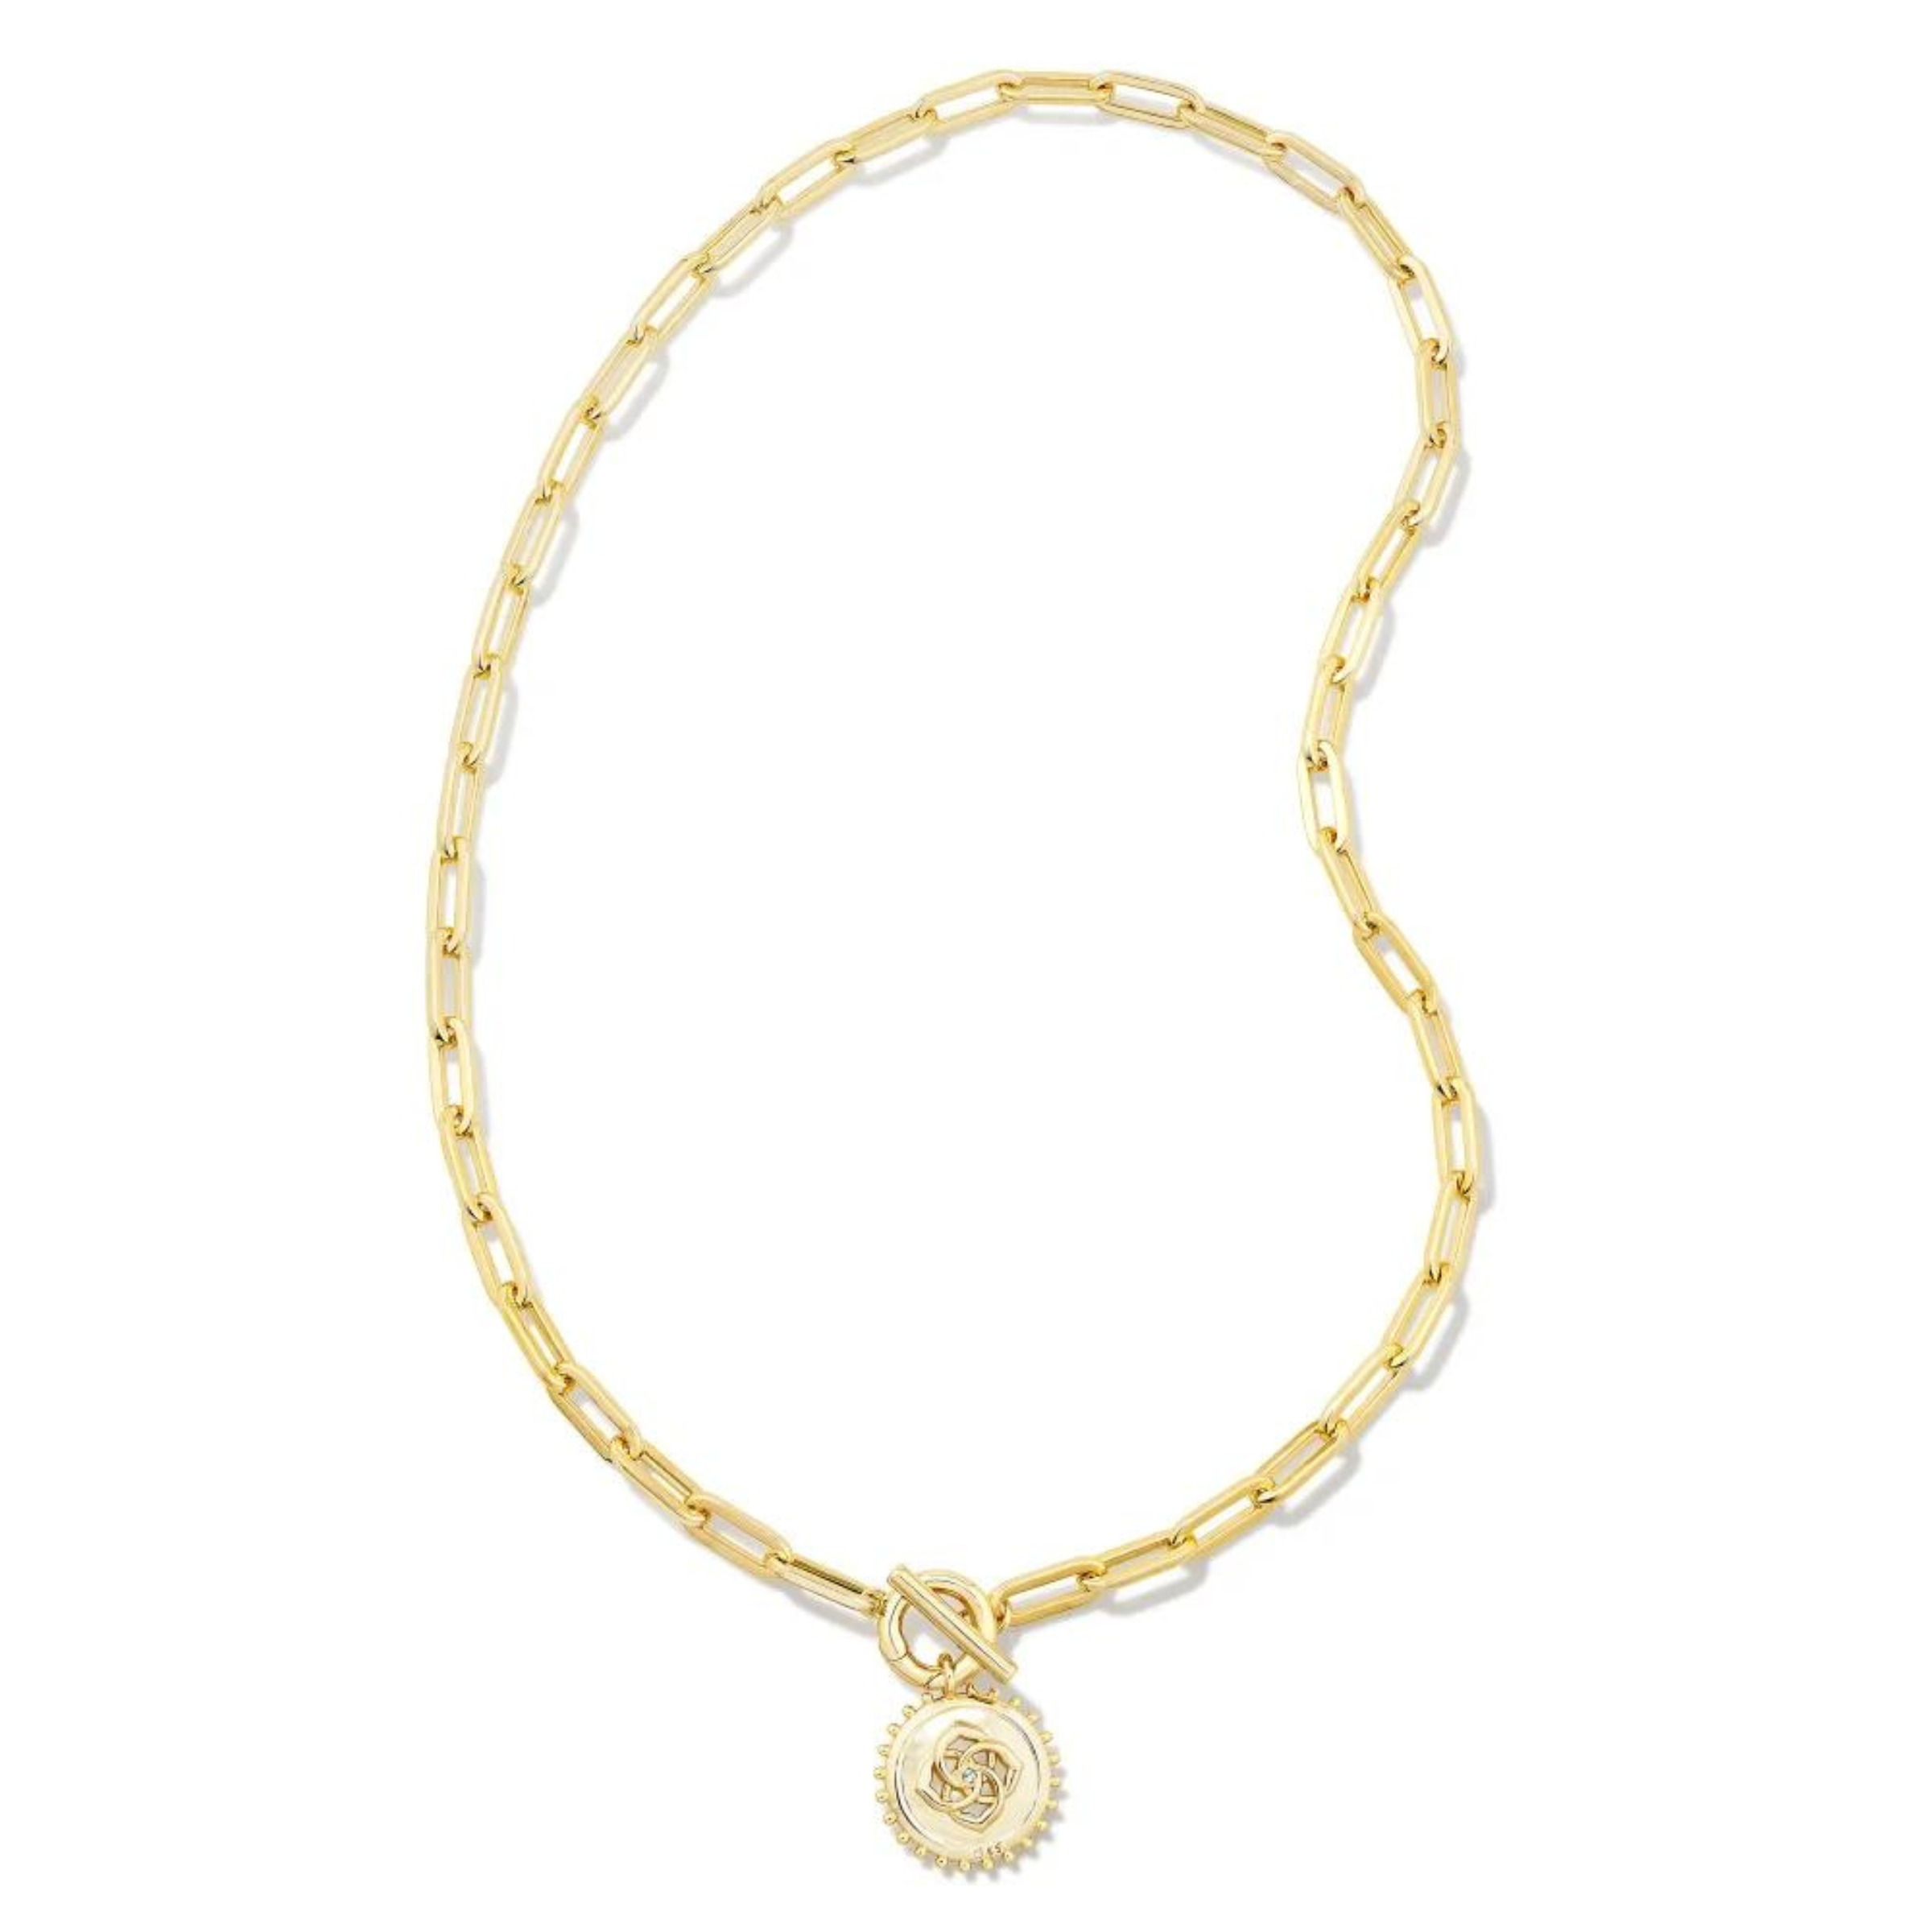 Gold, paperclip chain necklace with a toggle front clasp. This necklace also includes a gold medallion charm. This necklace is pictured on a white background. 